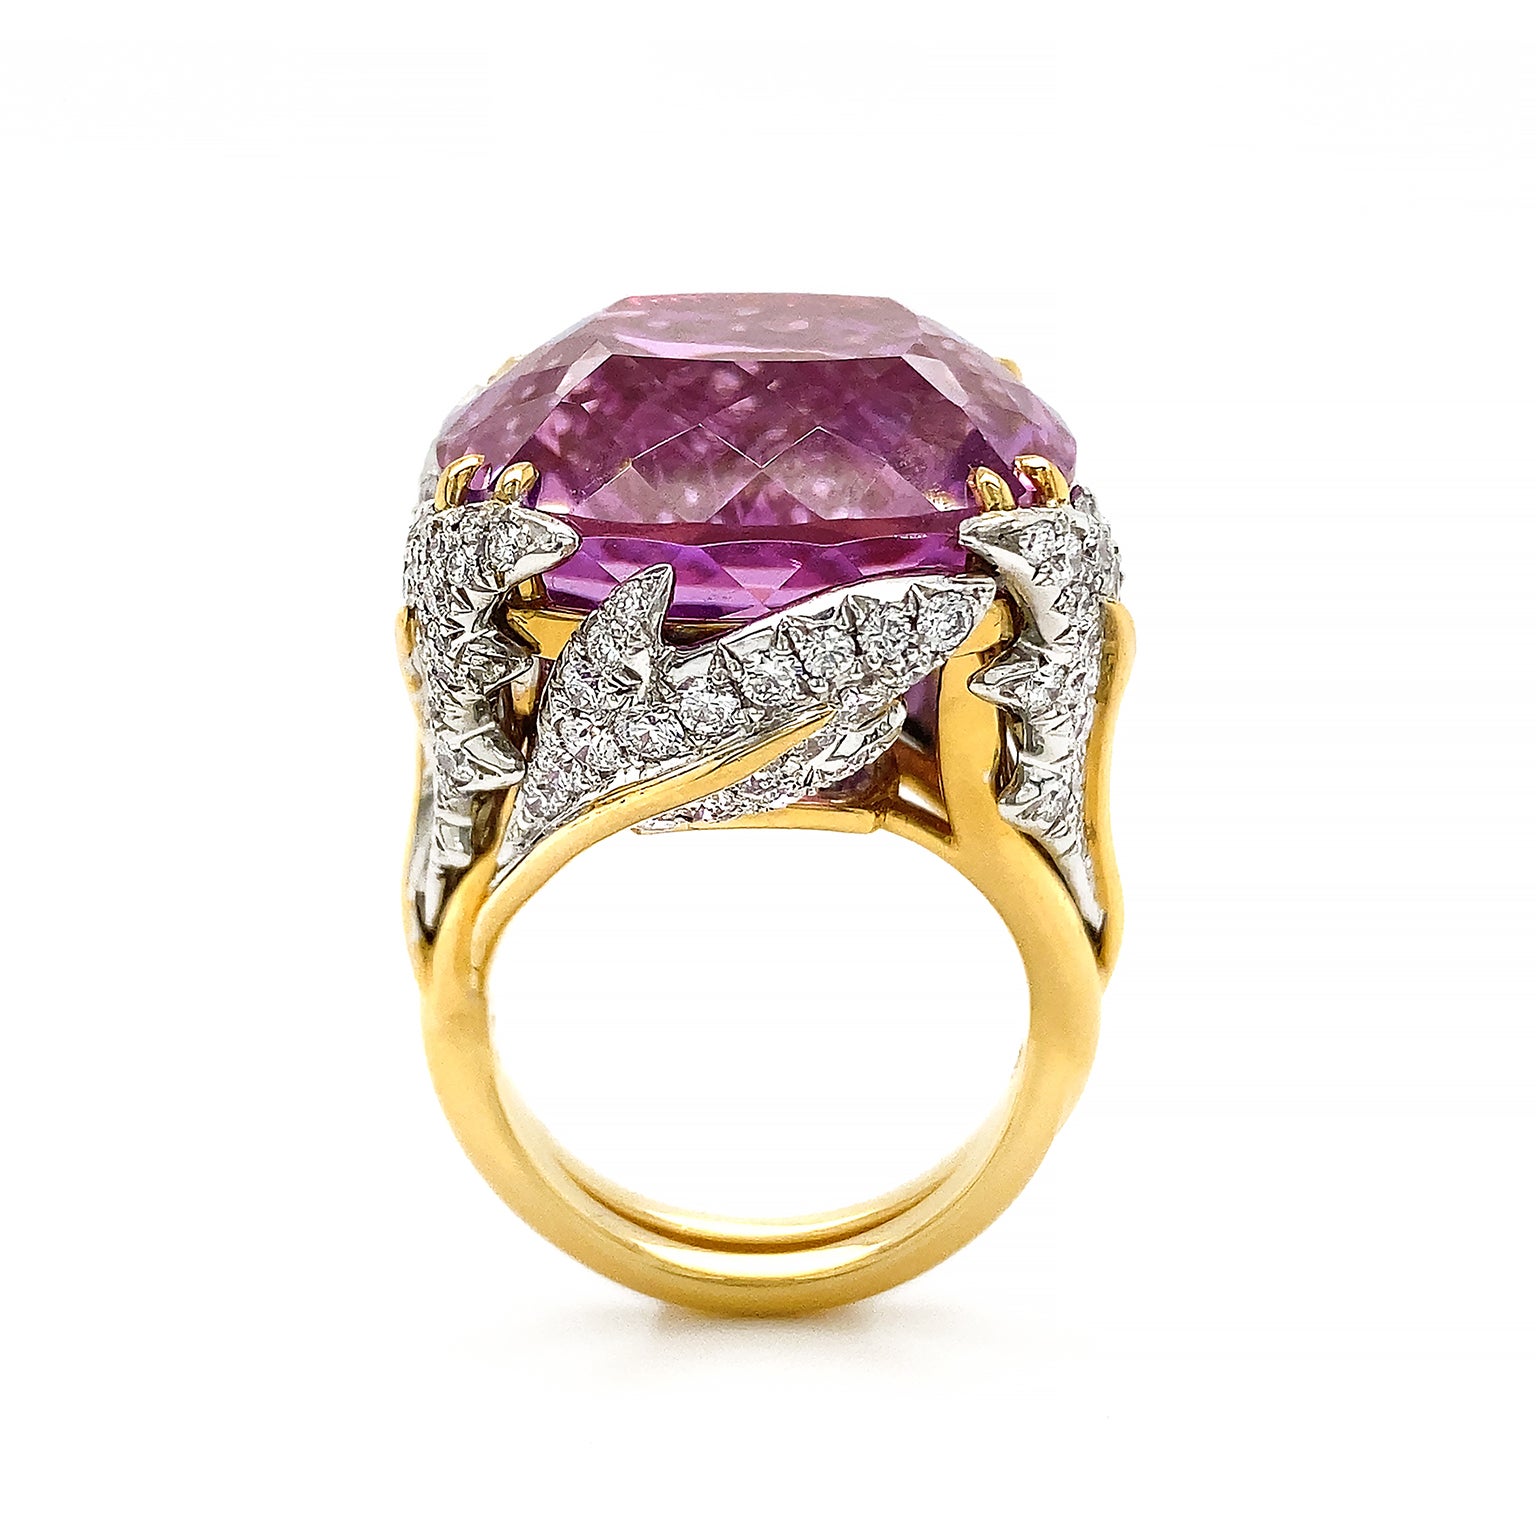 Kunzite glisters as the apogee of this ring. The unheated American-mined jewel has a vivid medium tone. Varied hues of purple and pink are lifted by the cushion cut with a strong pavilion. Platinum leaves adorned with brilliant cut diamonds overlap